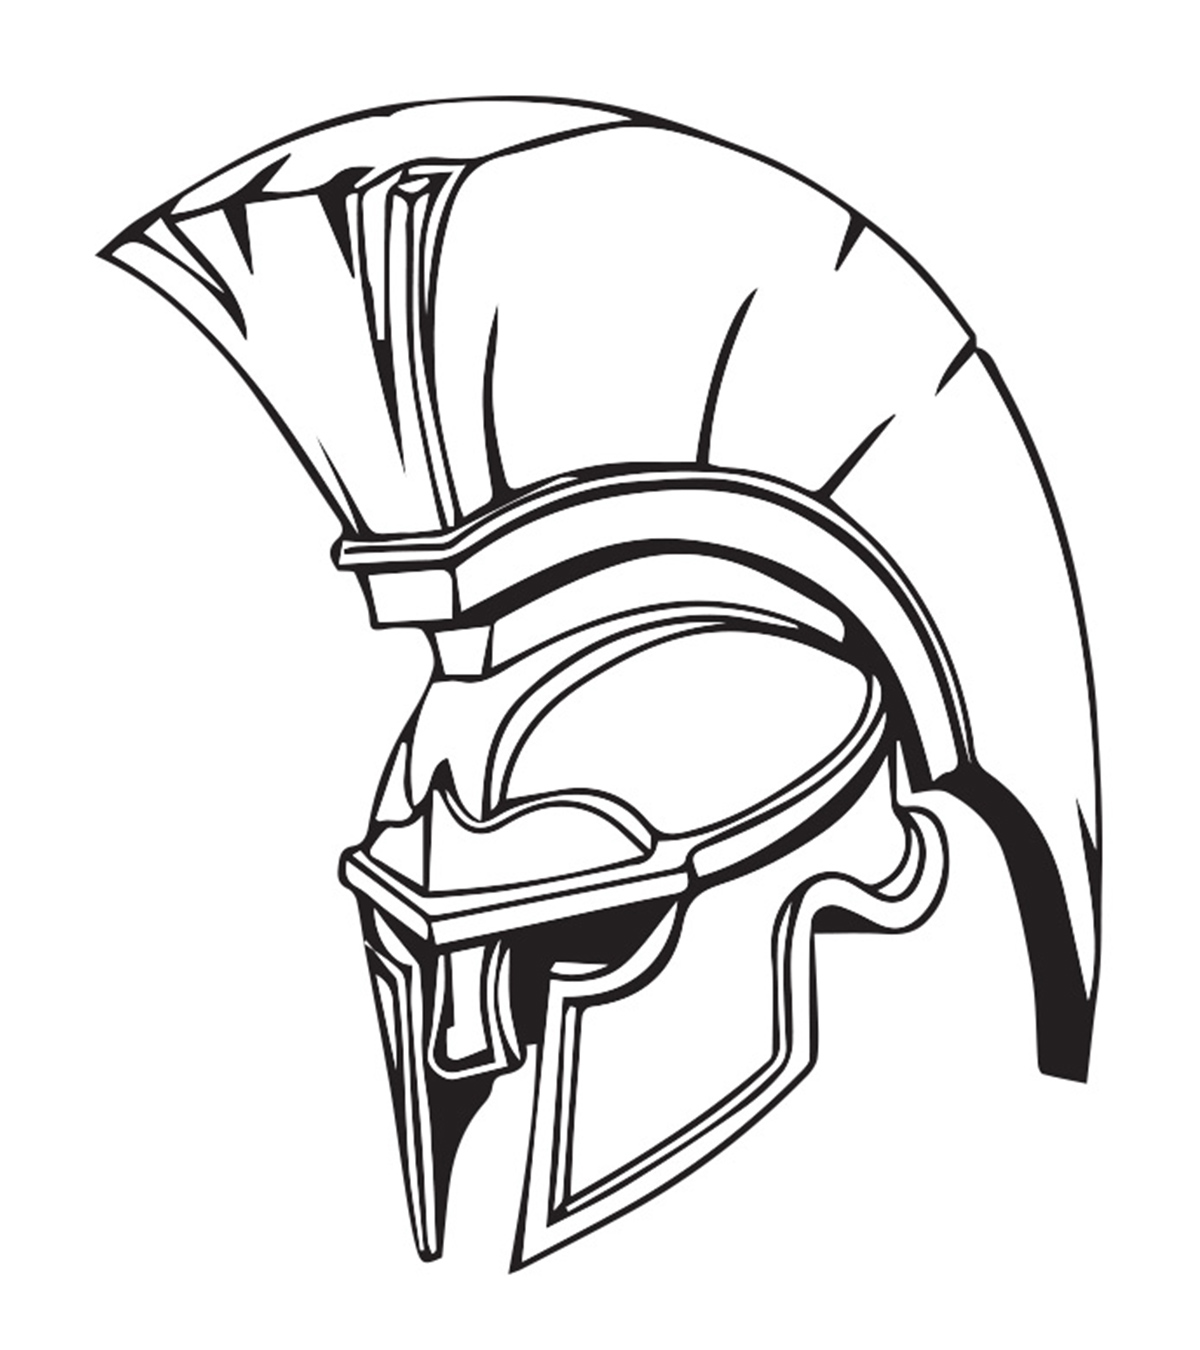 Top 10 Knight Coloring Pages For Your Little Ones_image